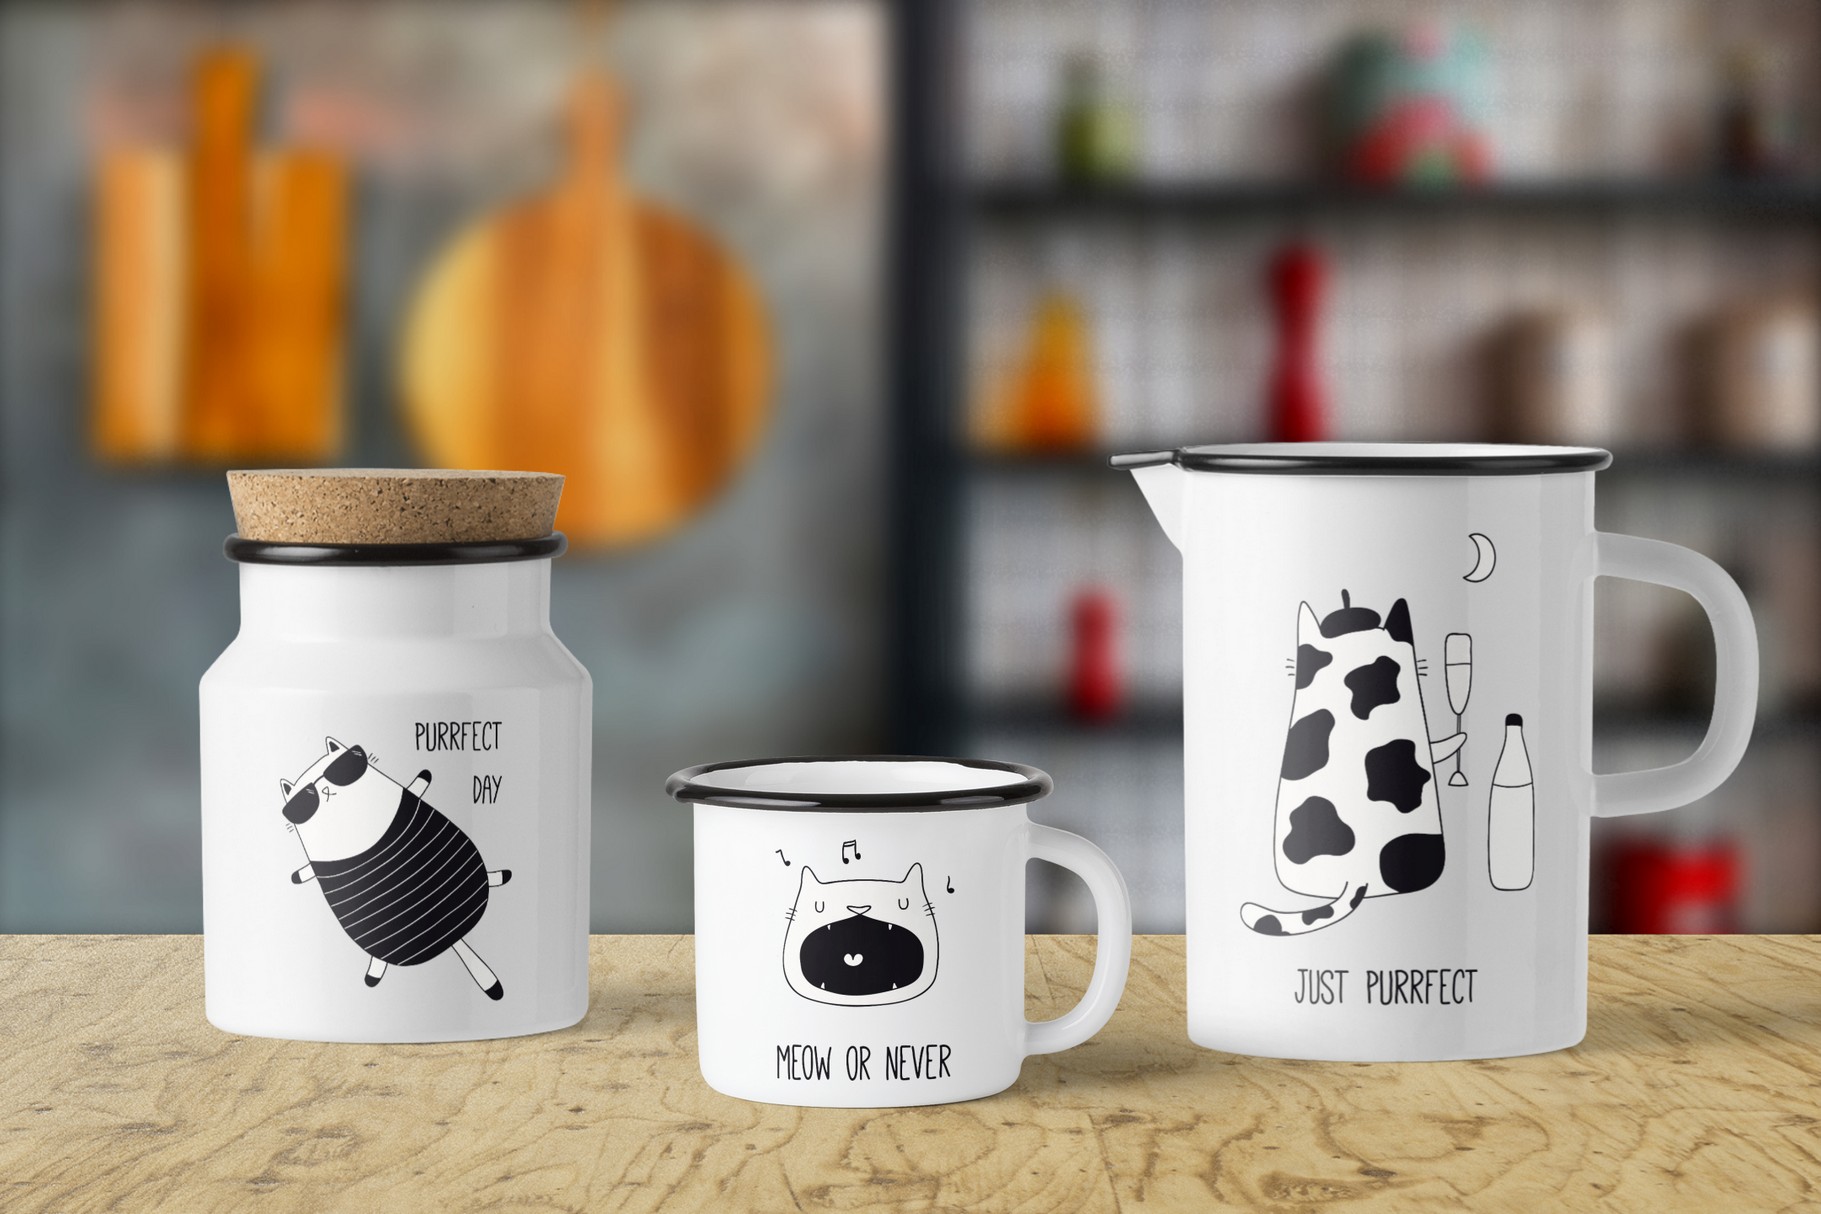 Prints of cats on cups and mugs.